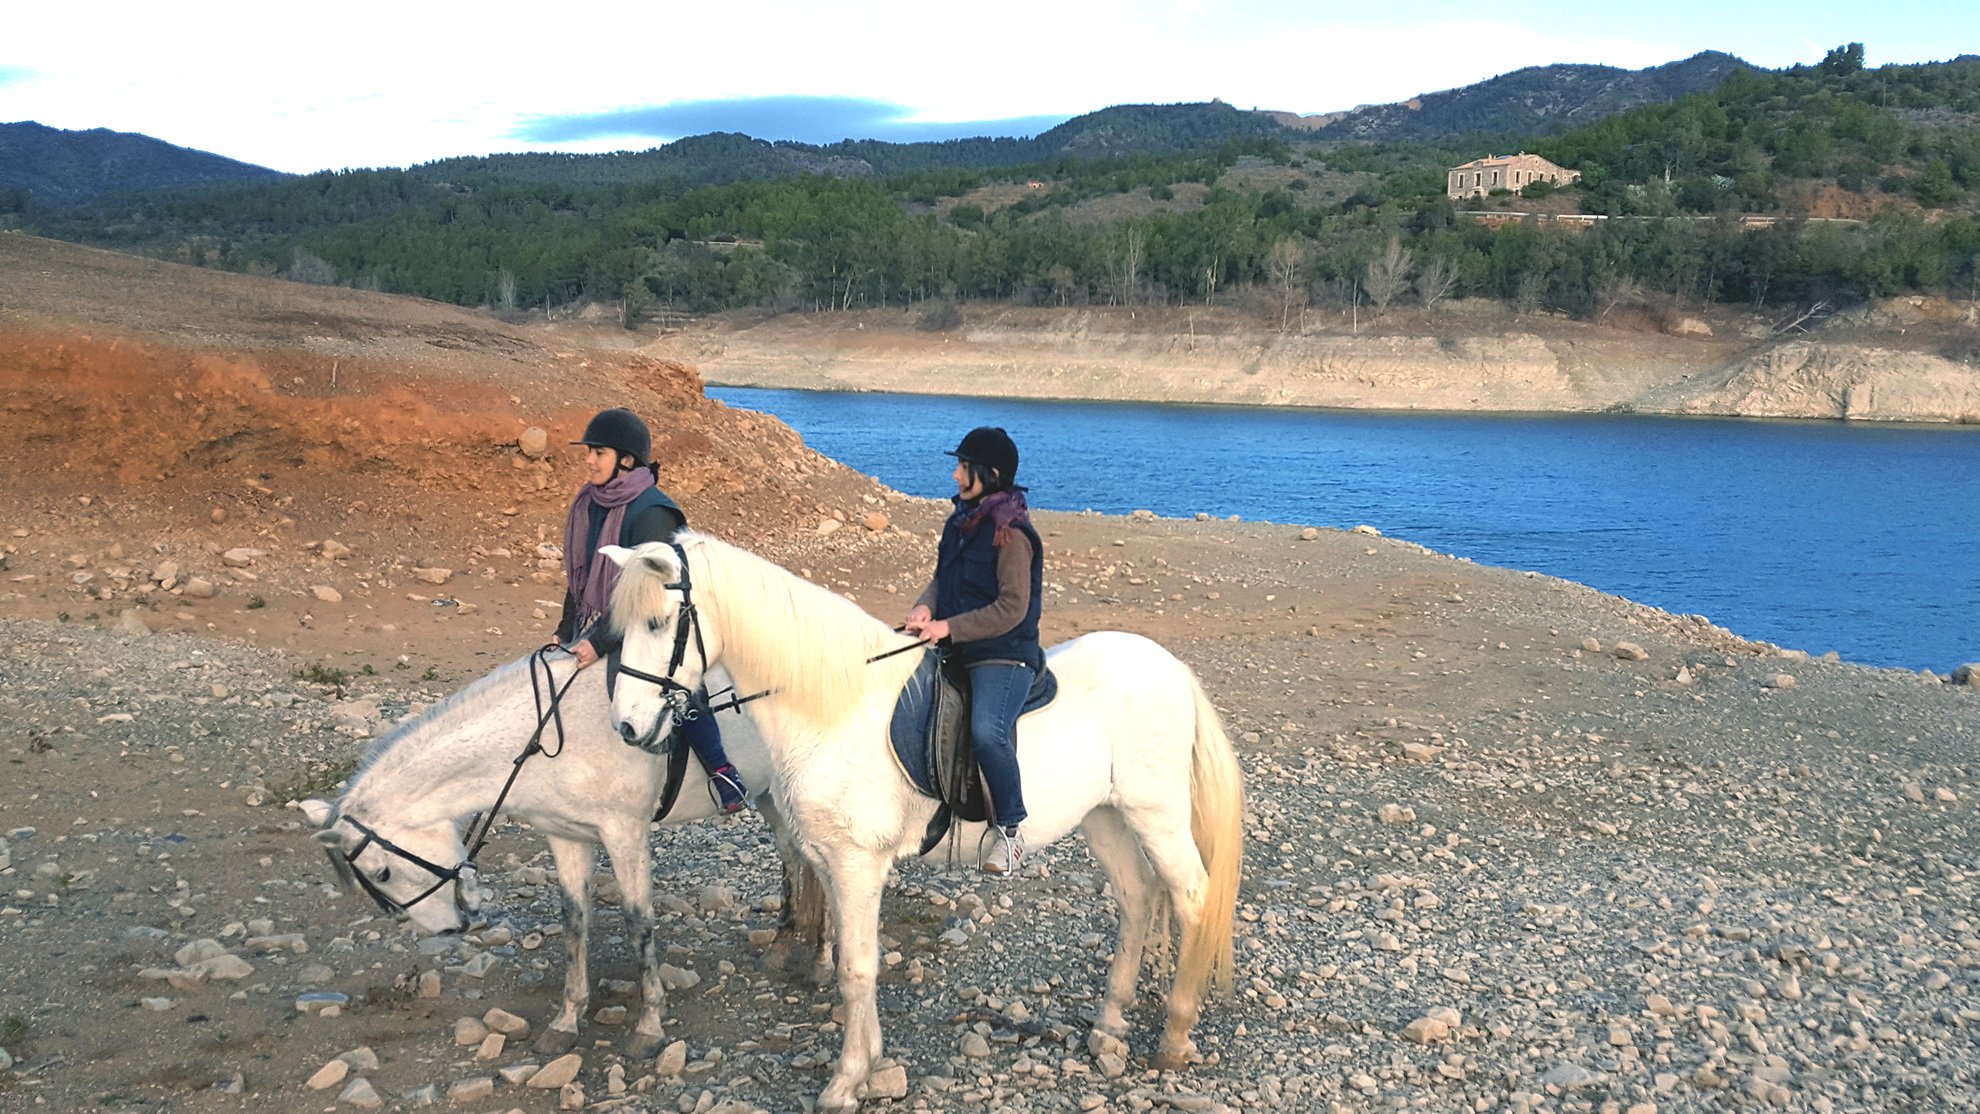 Horseriding excursion to the lake of Riudecanyes, Casa Vella in the background